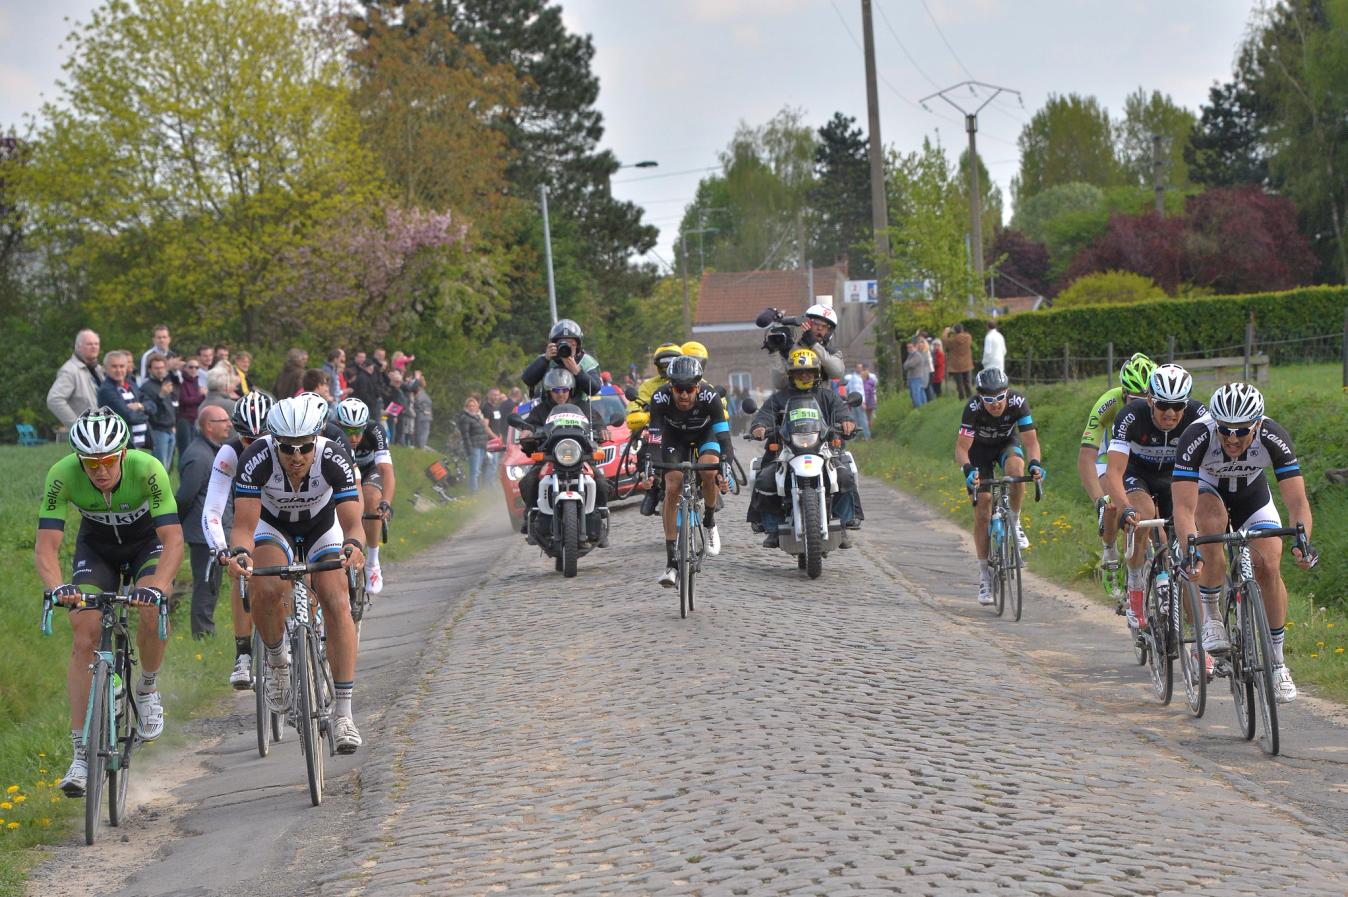 Bradley Wiggins and Geraint Thomas following the moves in Paris-Roubaix in 2014